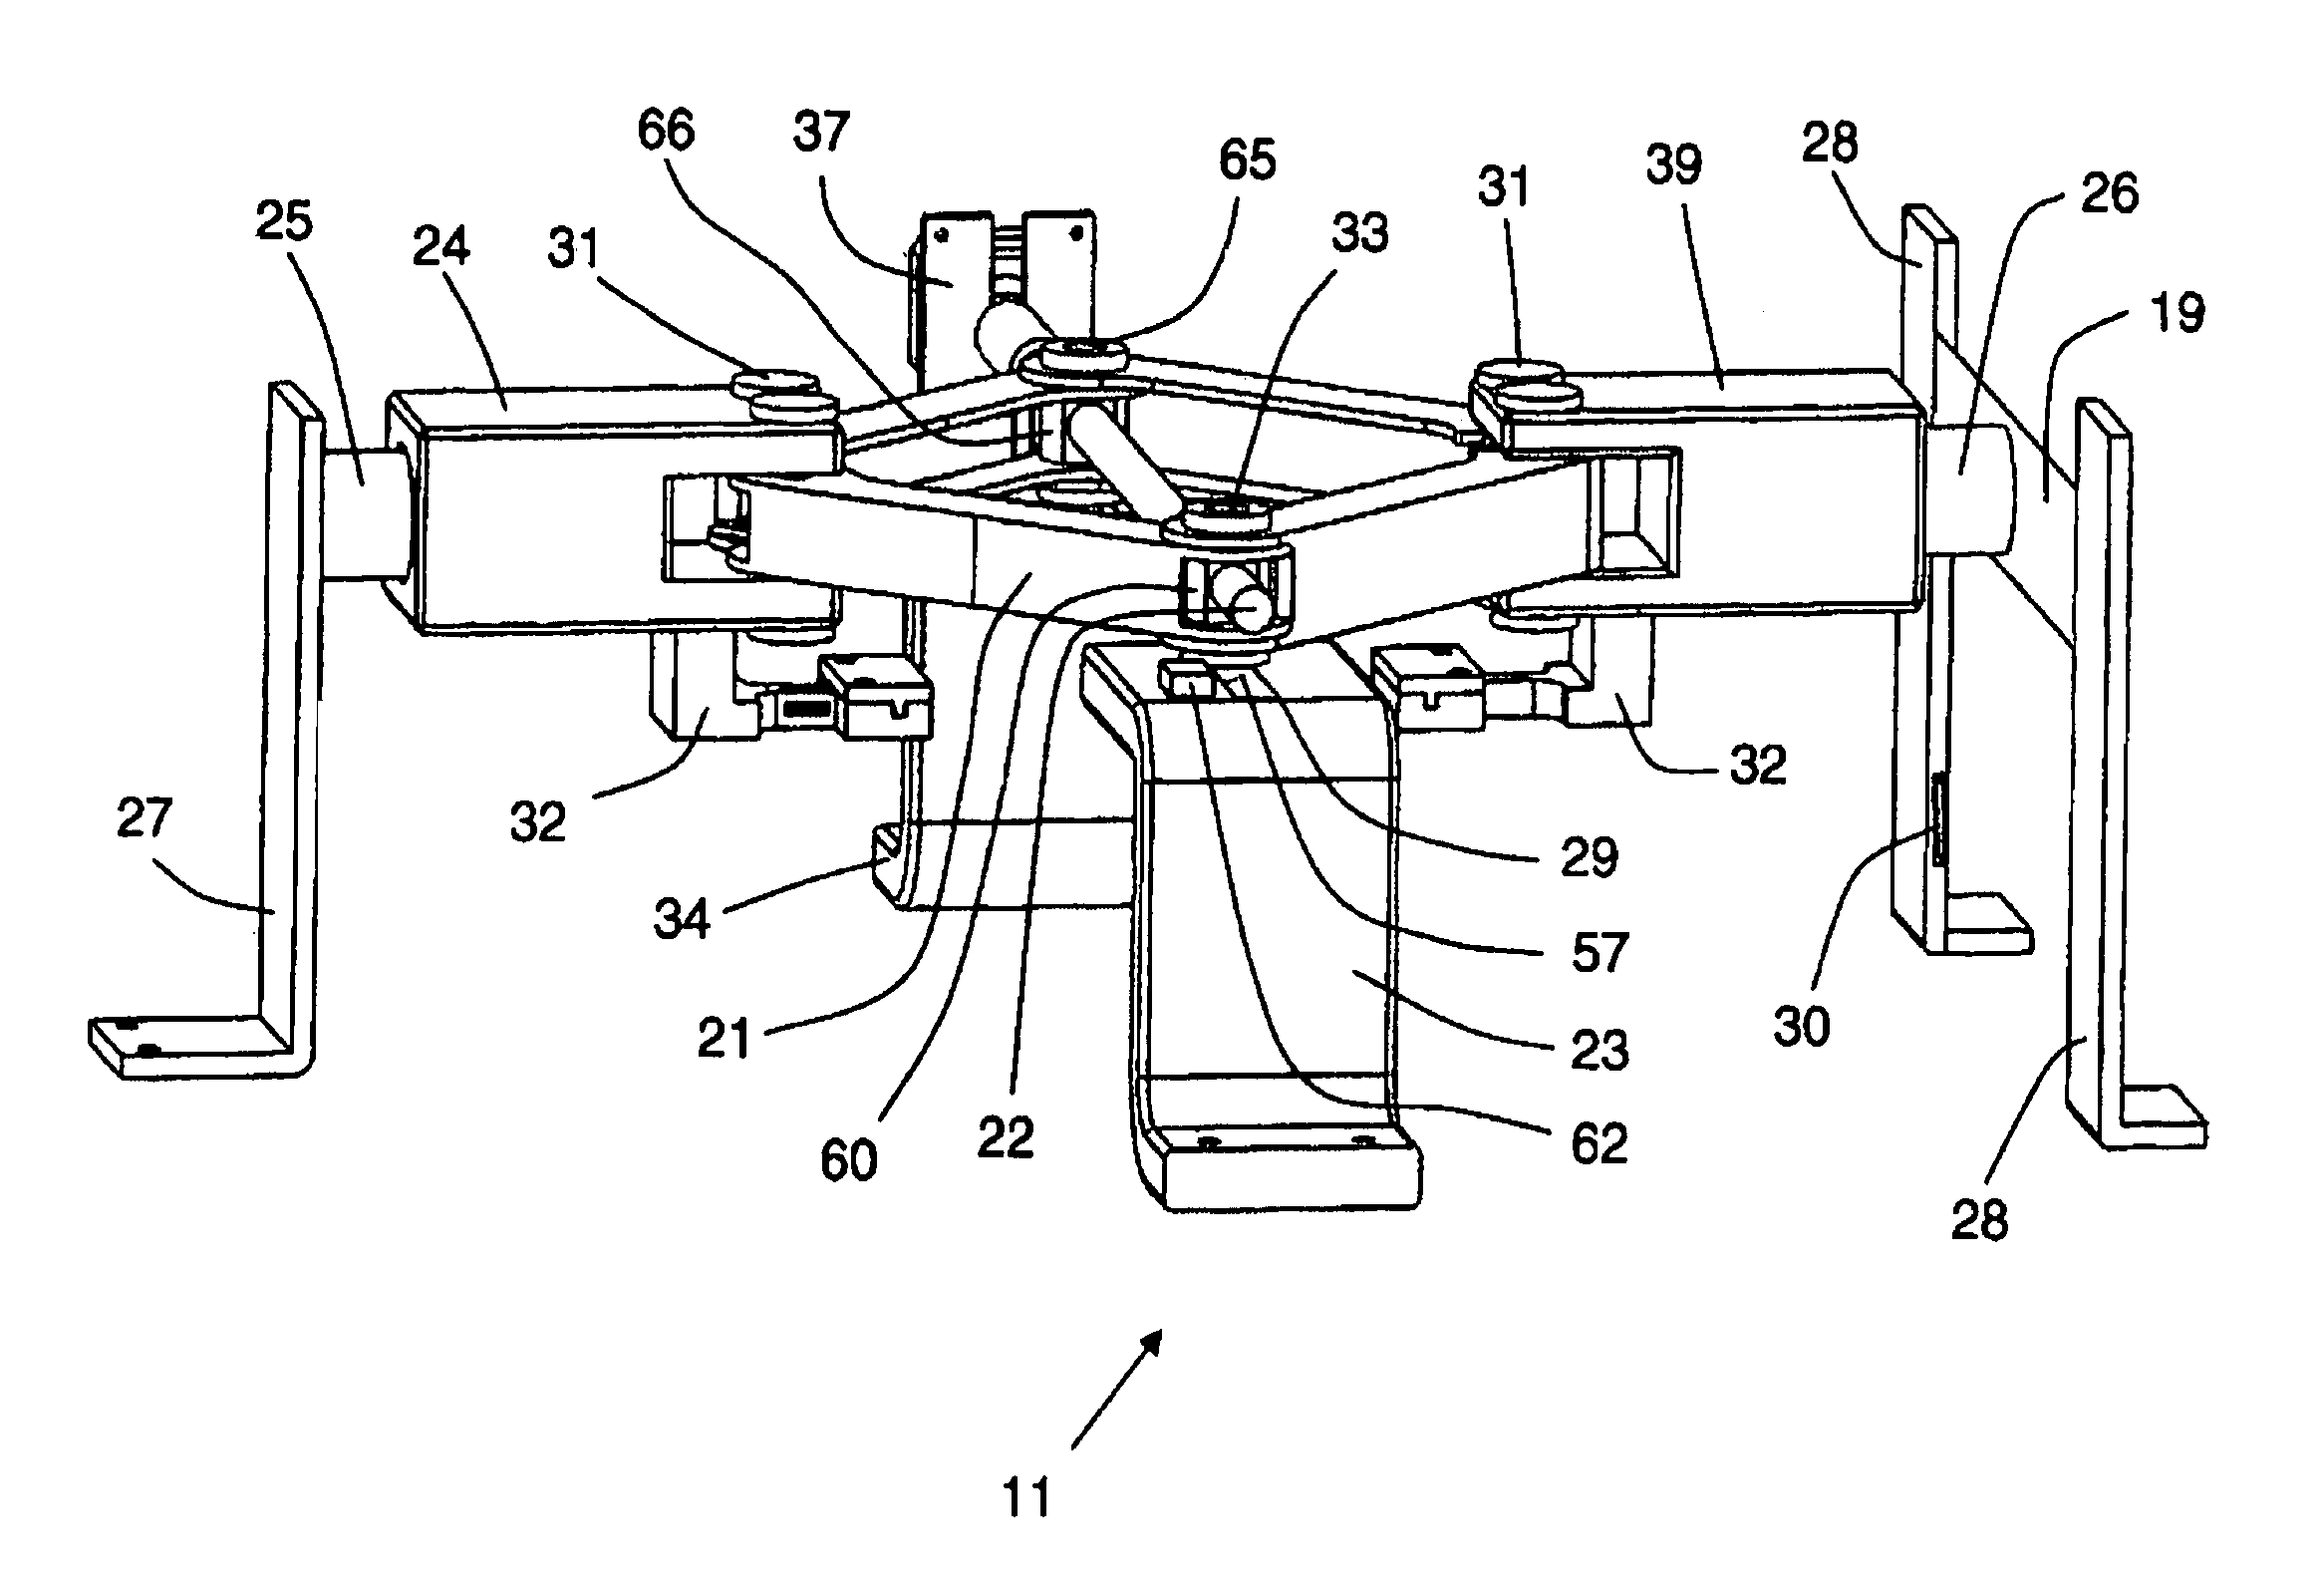 Compact and stand-alone combined multi-axial and shear test apparatus